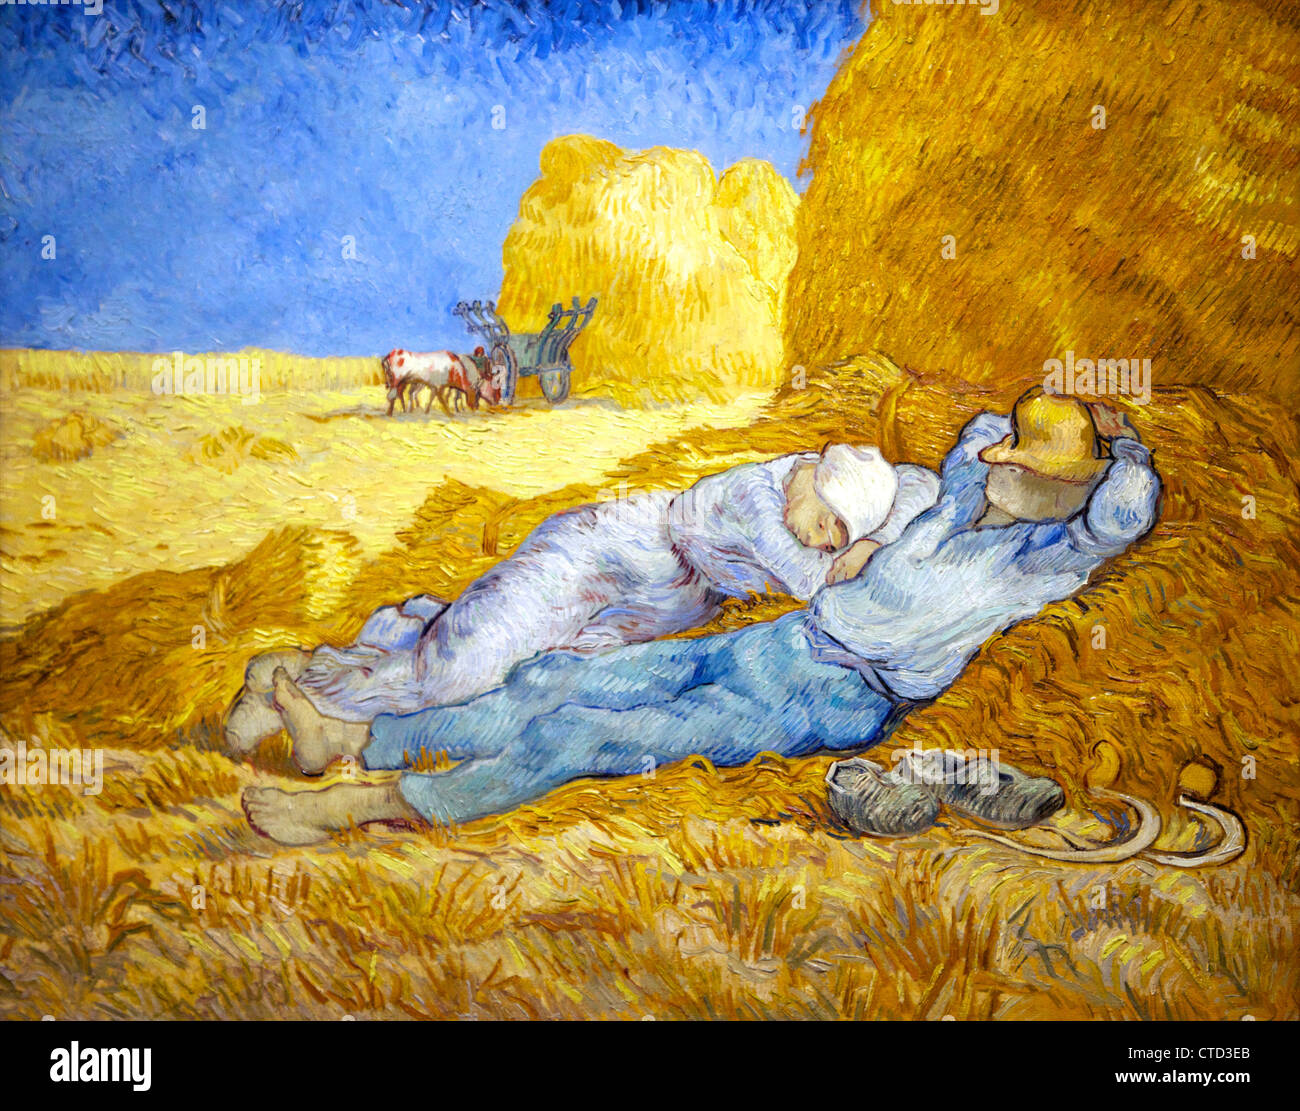 La Meridienne or Noon Rest by Vincent van Gogh, oil on canvas, 1890, Musee D'Orsay Art Gallery and Museum, Paris, France Stock Photo